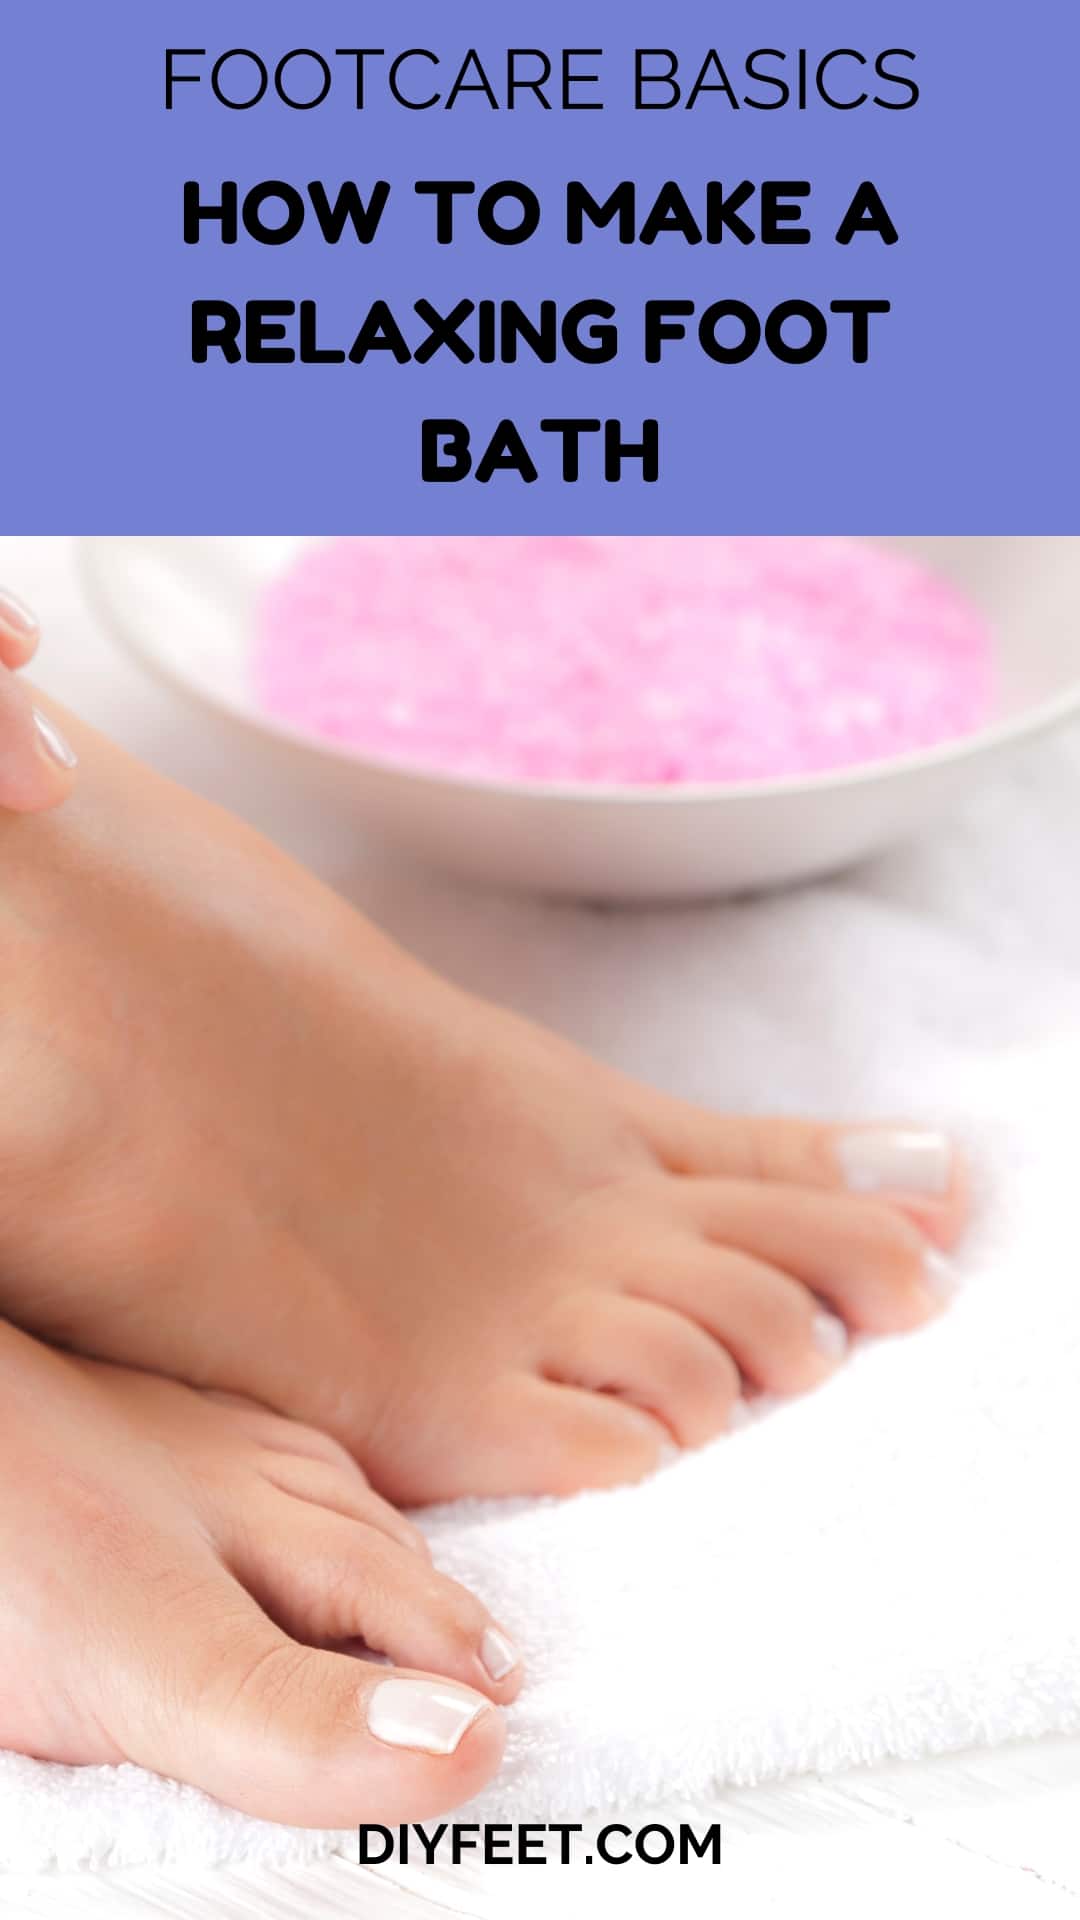 How to Make a Relaxing Foot Bath